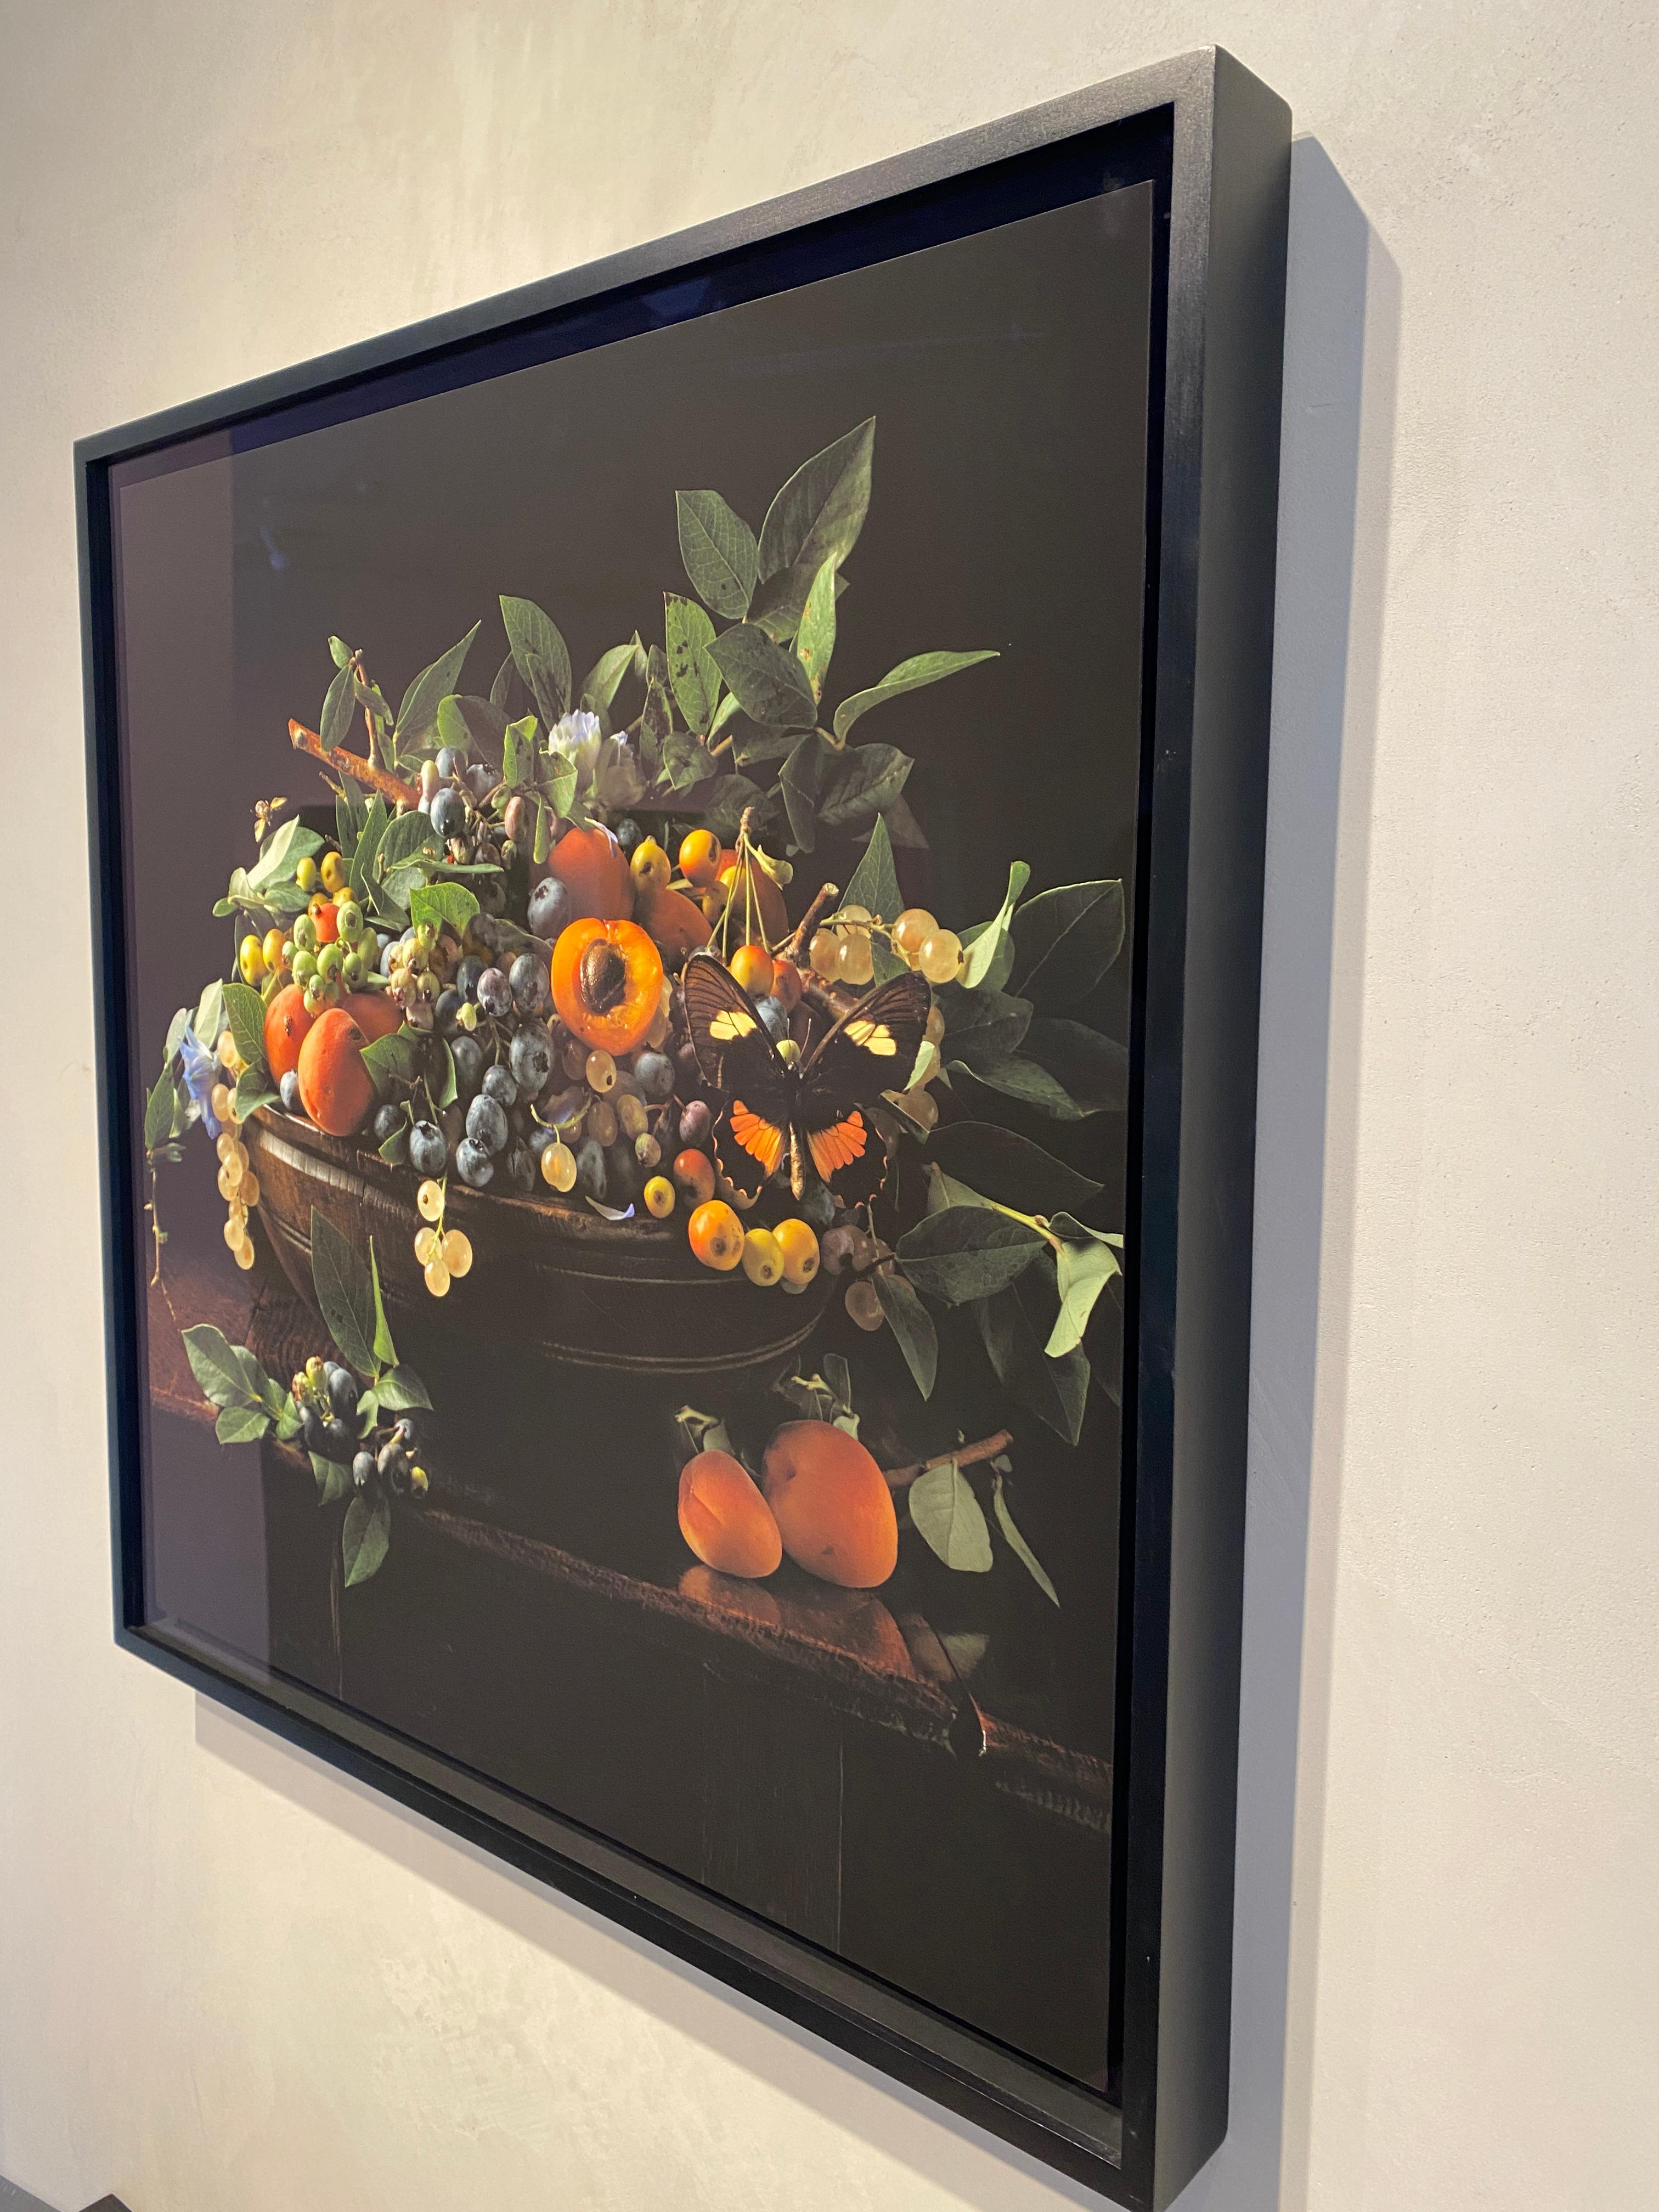 Framed in black this lush color still life photograph from photographer Paulette Tavormina  is filled with color. 

Other sizes available- Contact Gilman Contemporary for additional information. 

Paulette Tavormina lives and works in New York City.